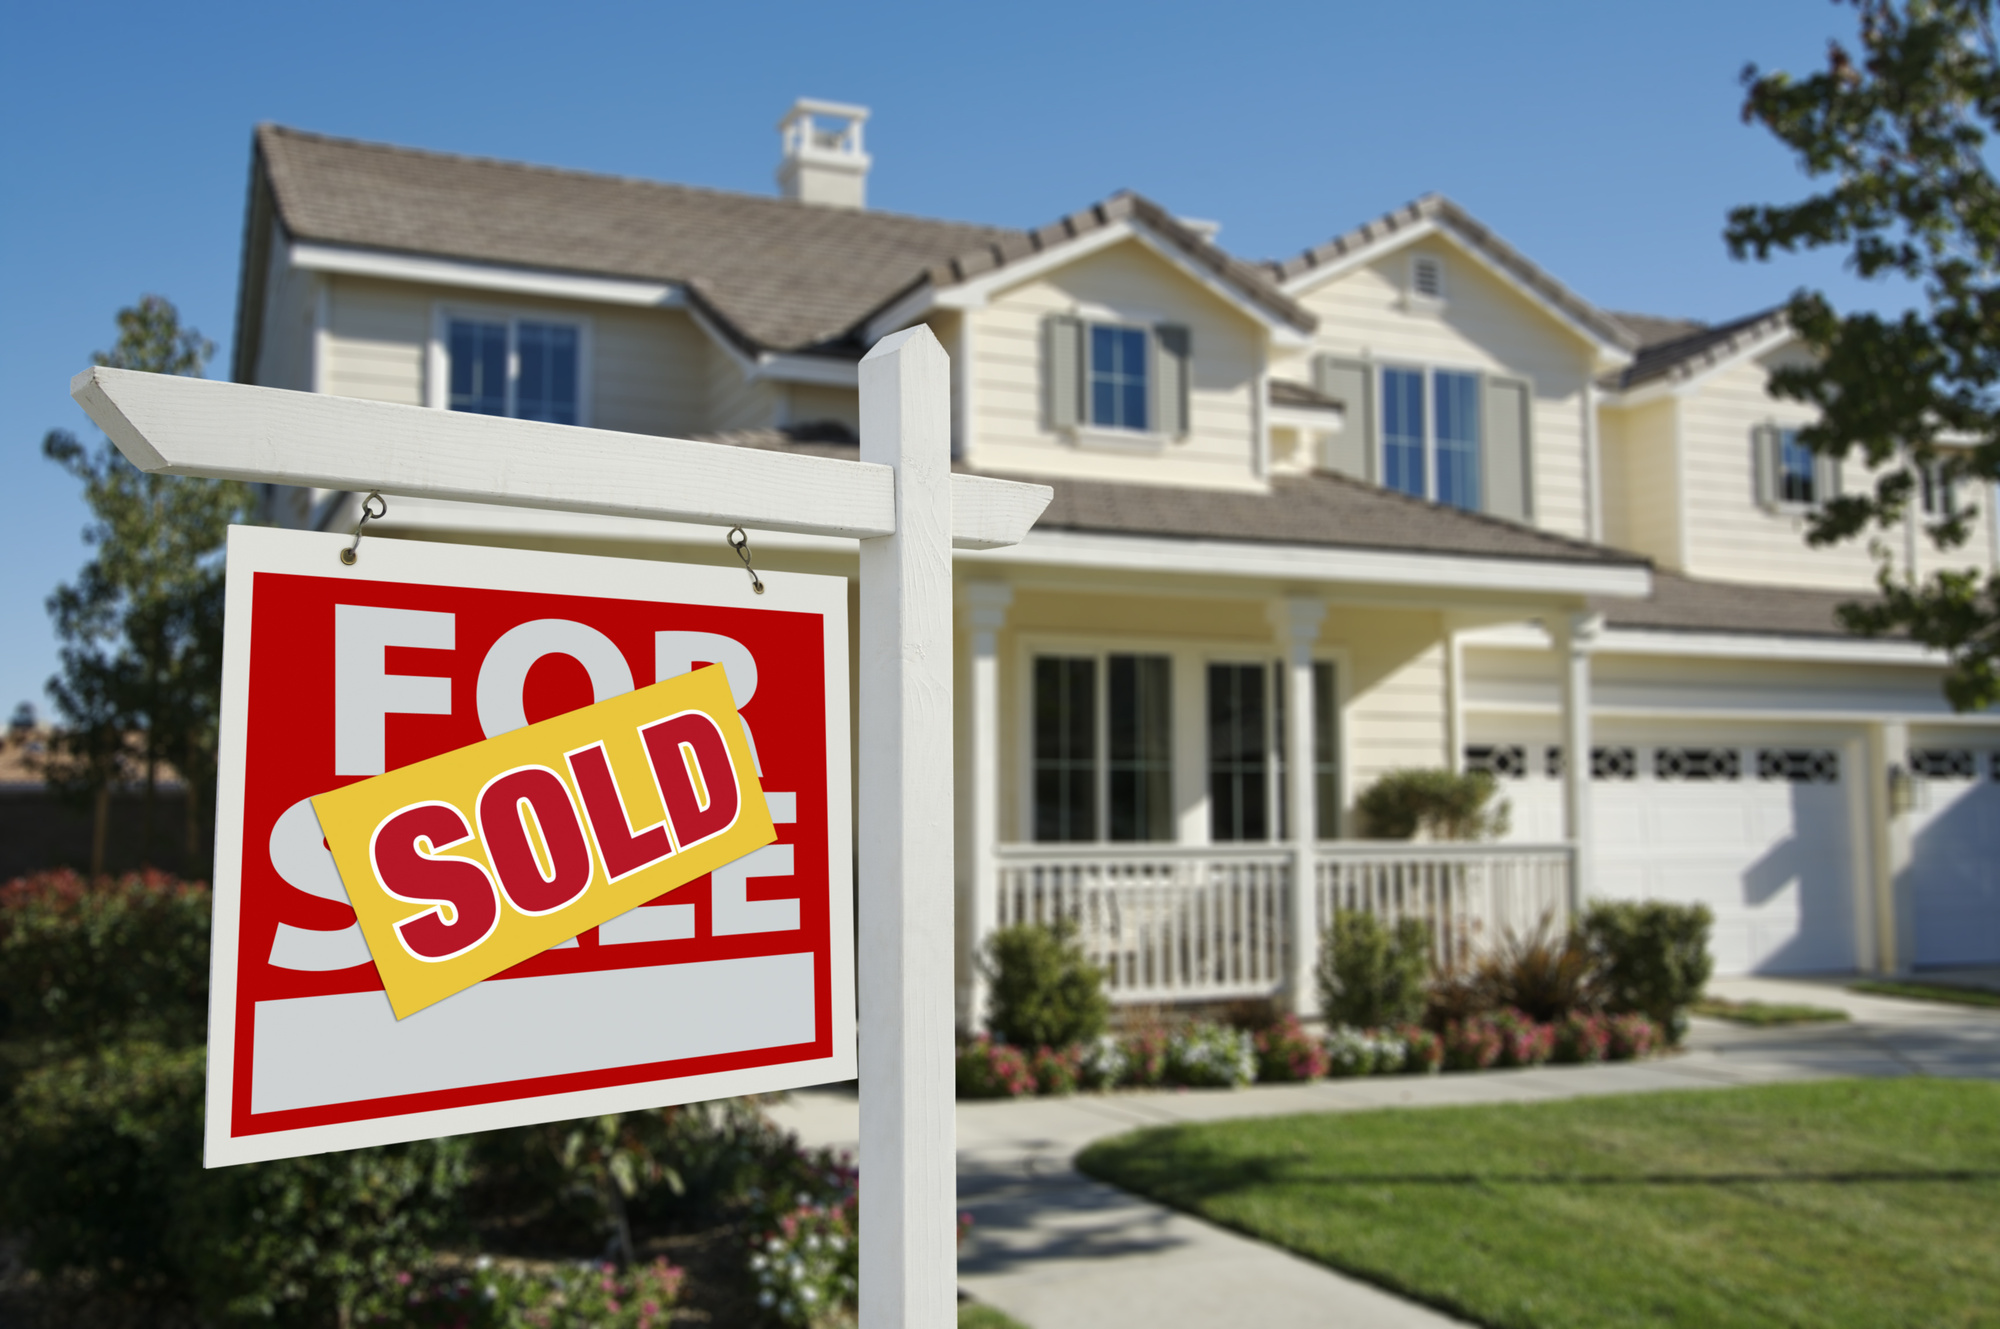 How to Sell a House Fast: 4 Pro Tips